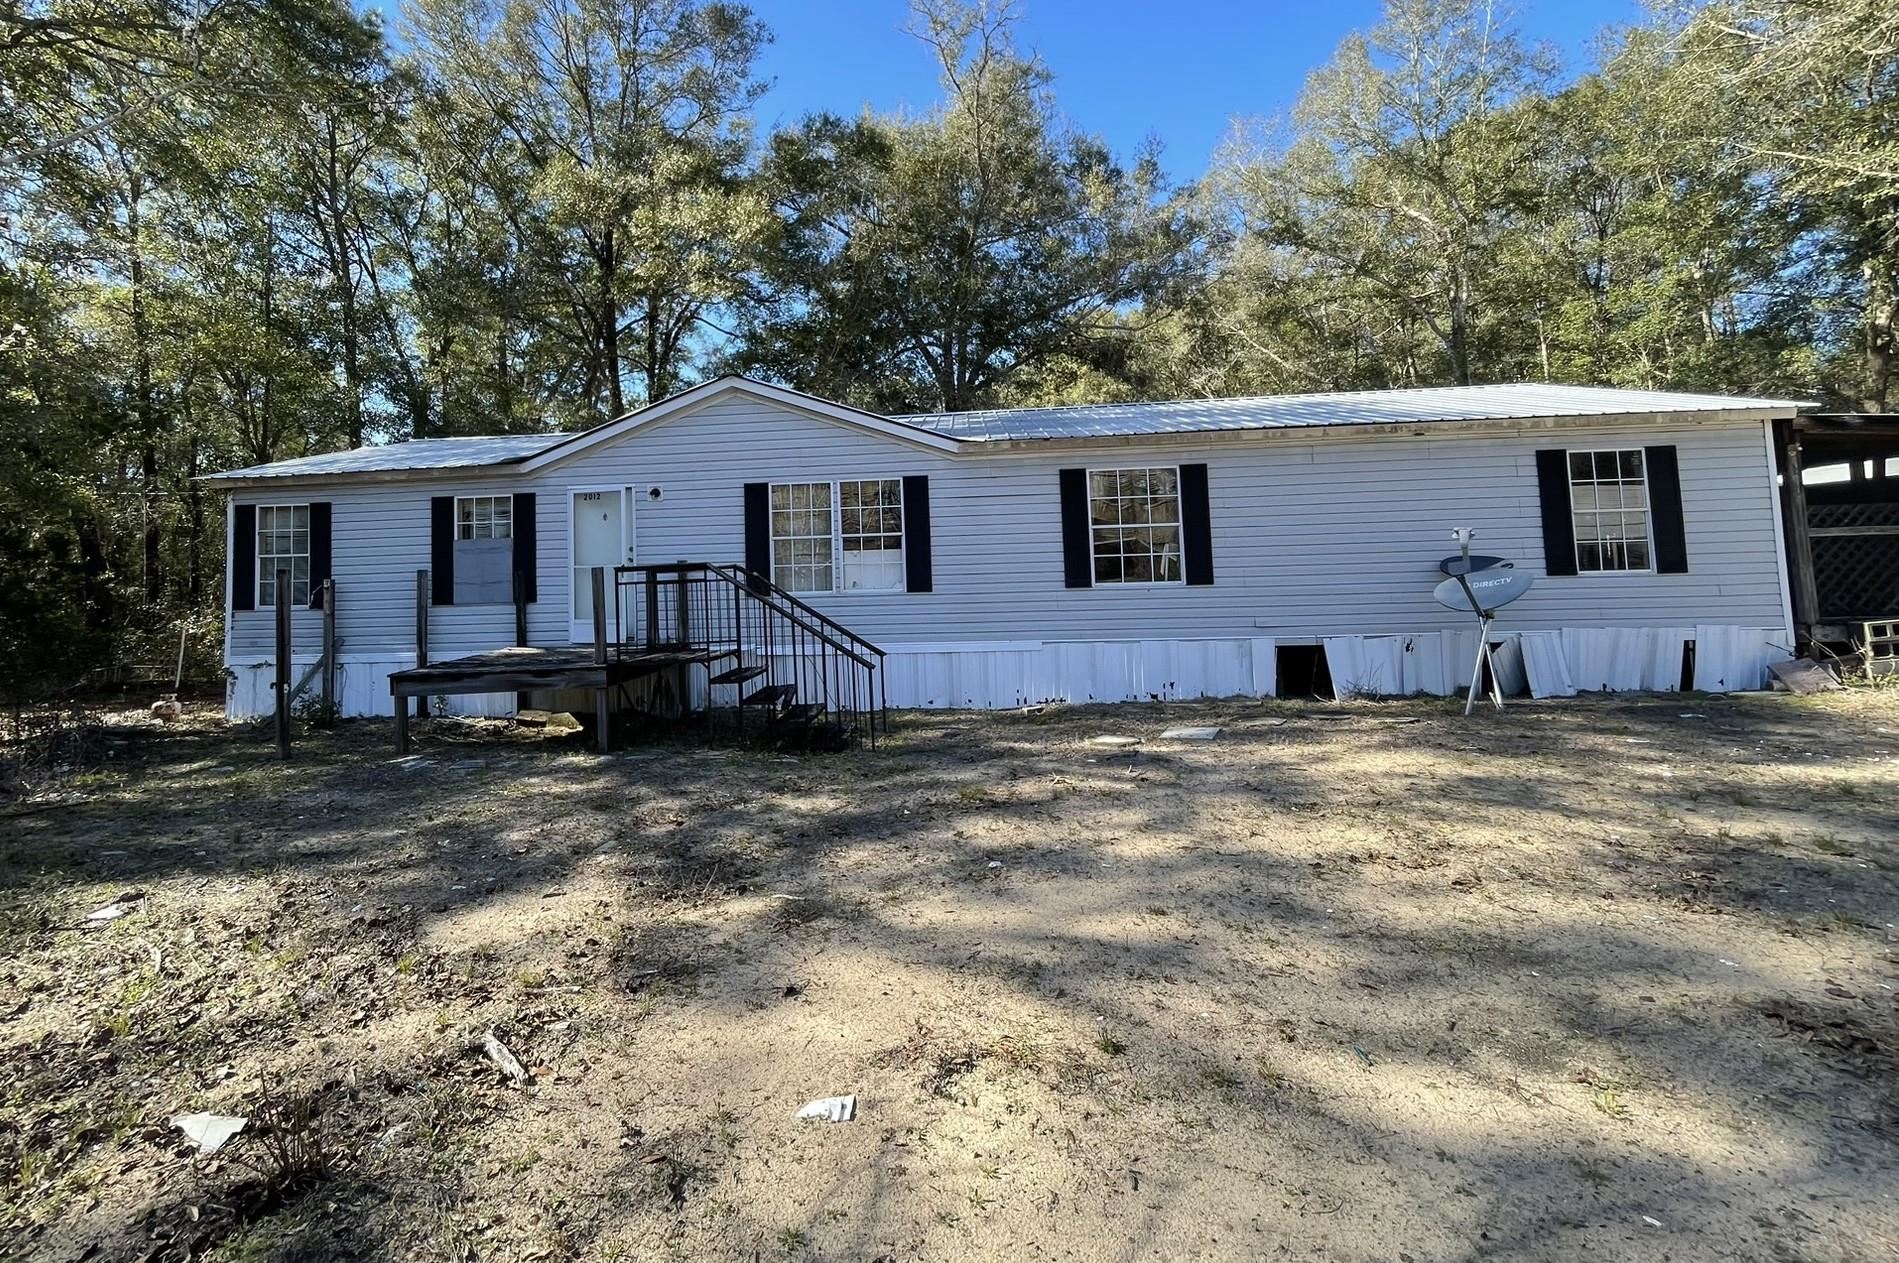 2012 Silver Lake Road,TALLAHASSEE,Florida 32310,3 Bedrooms Bedrooms,2 BathroomsBathrooms,Manuf/mobile home,2012 Silver Lake Road,368885